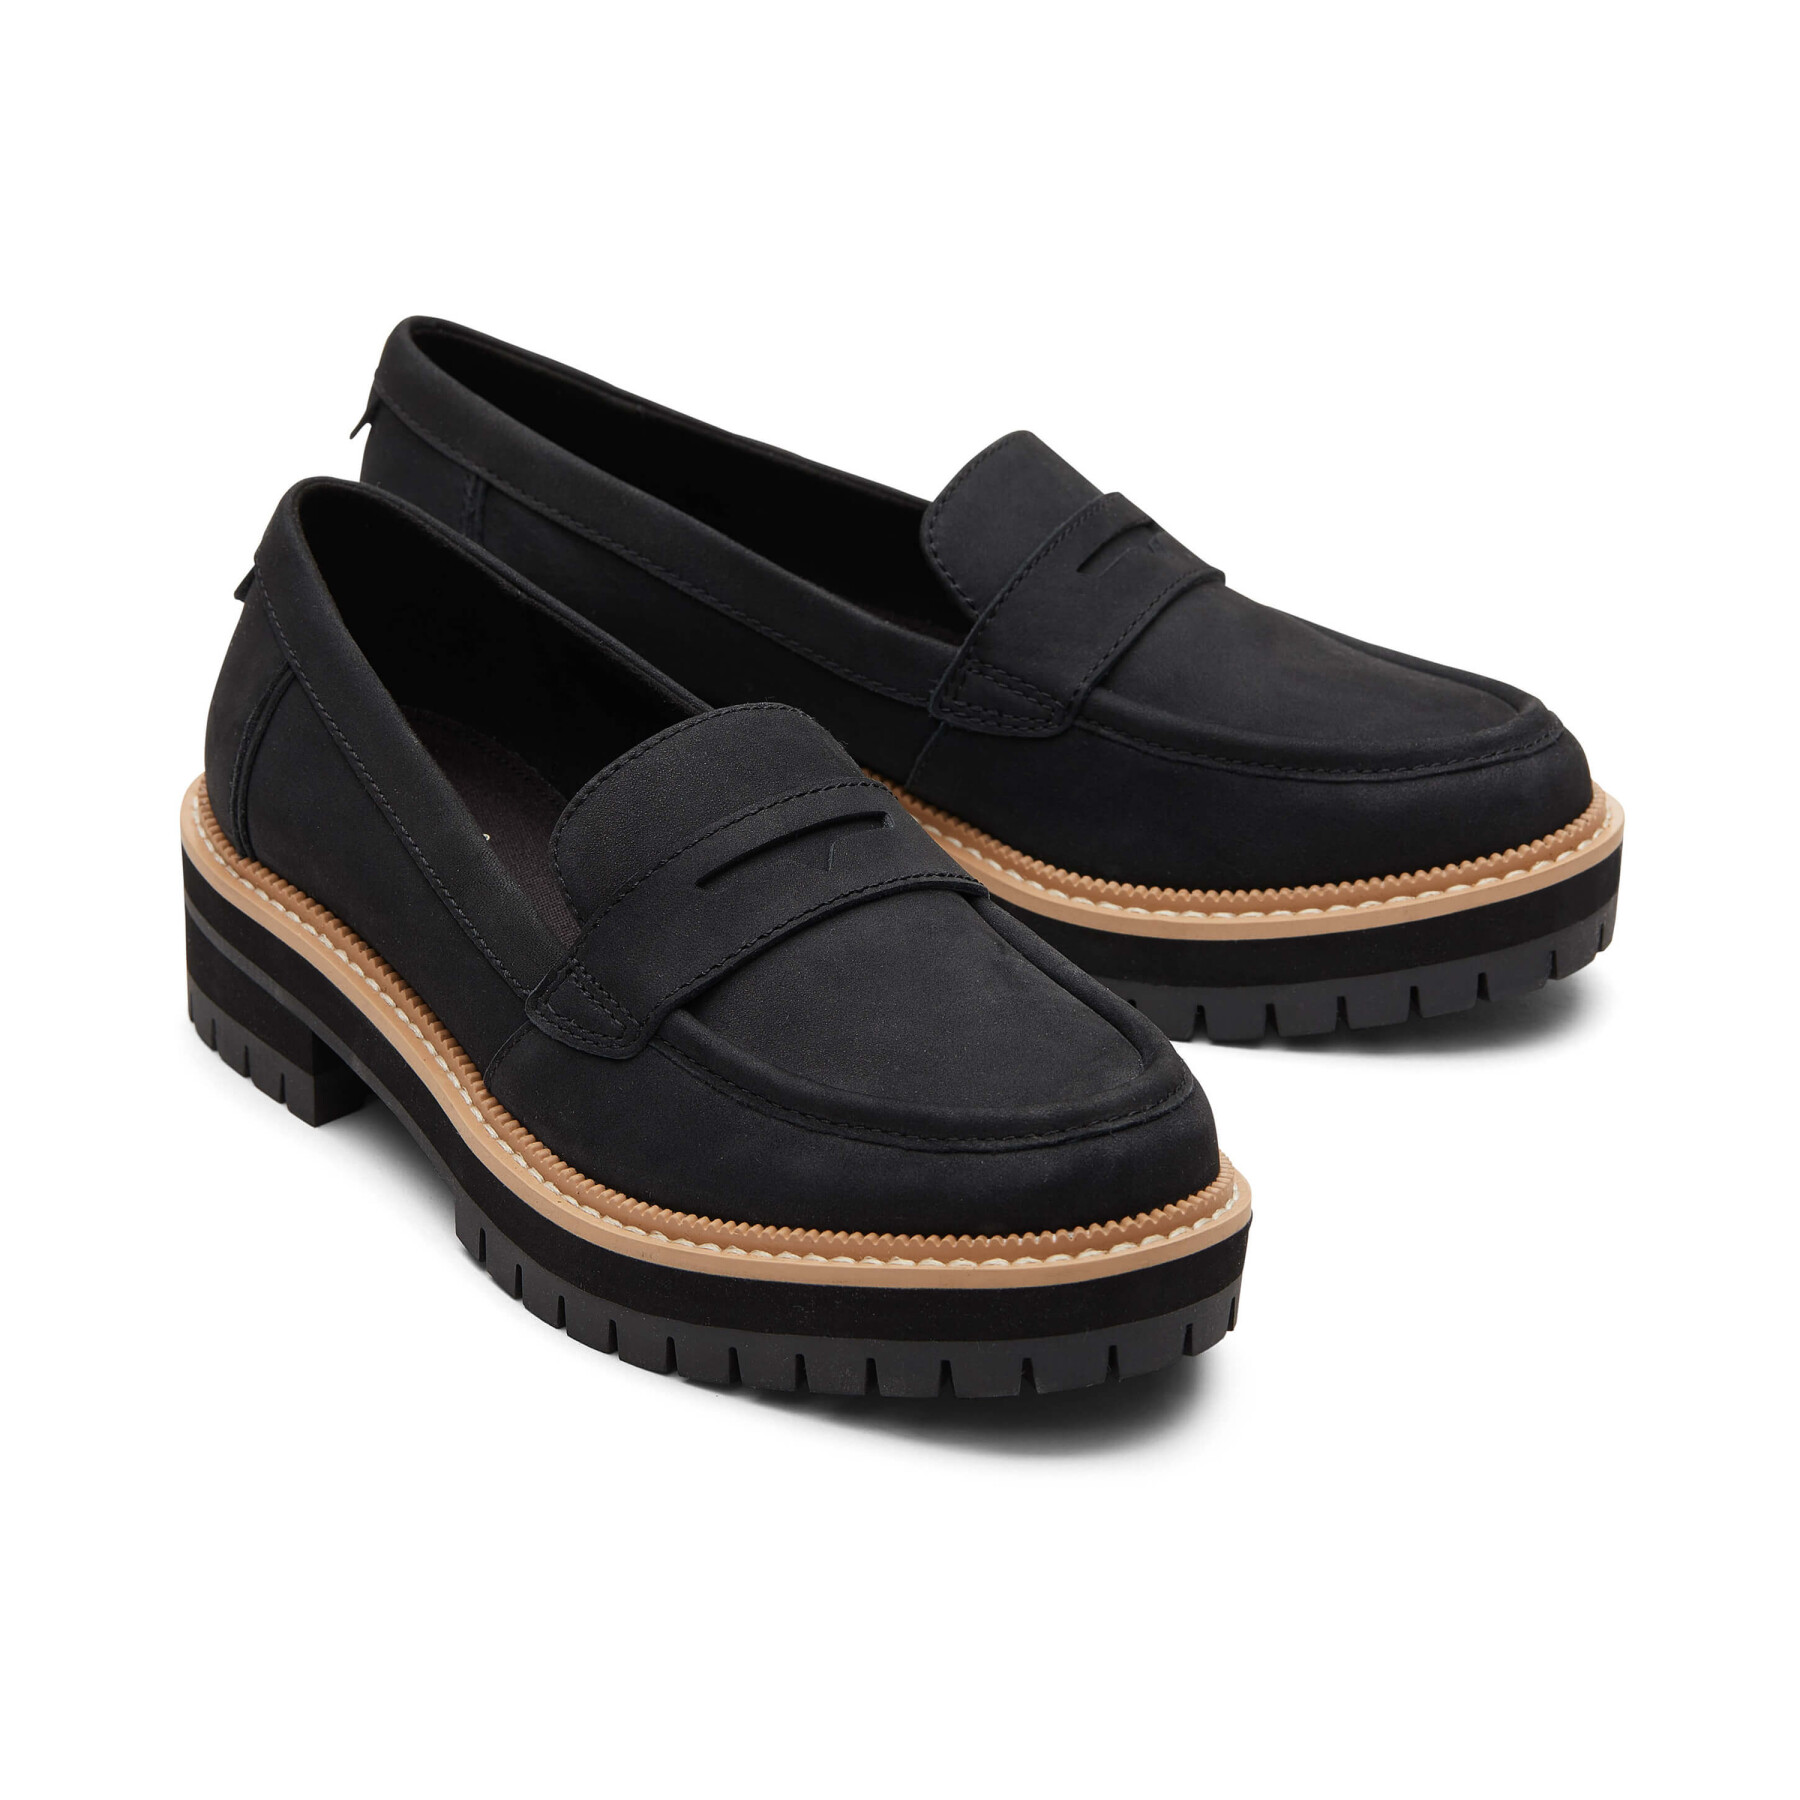 Women's leather loafers Toms Cara